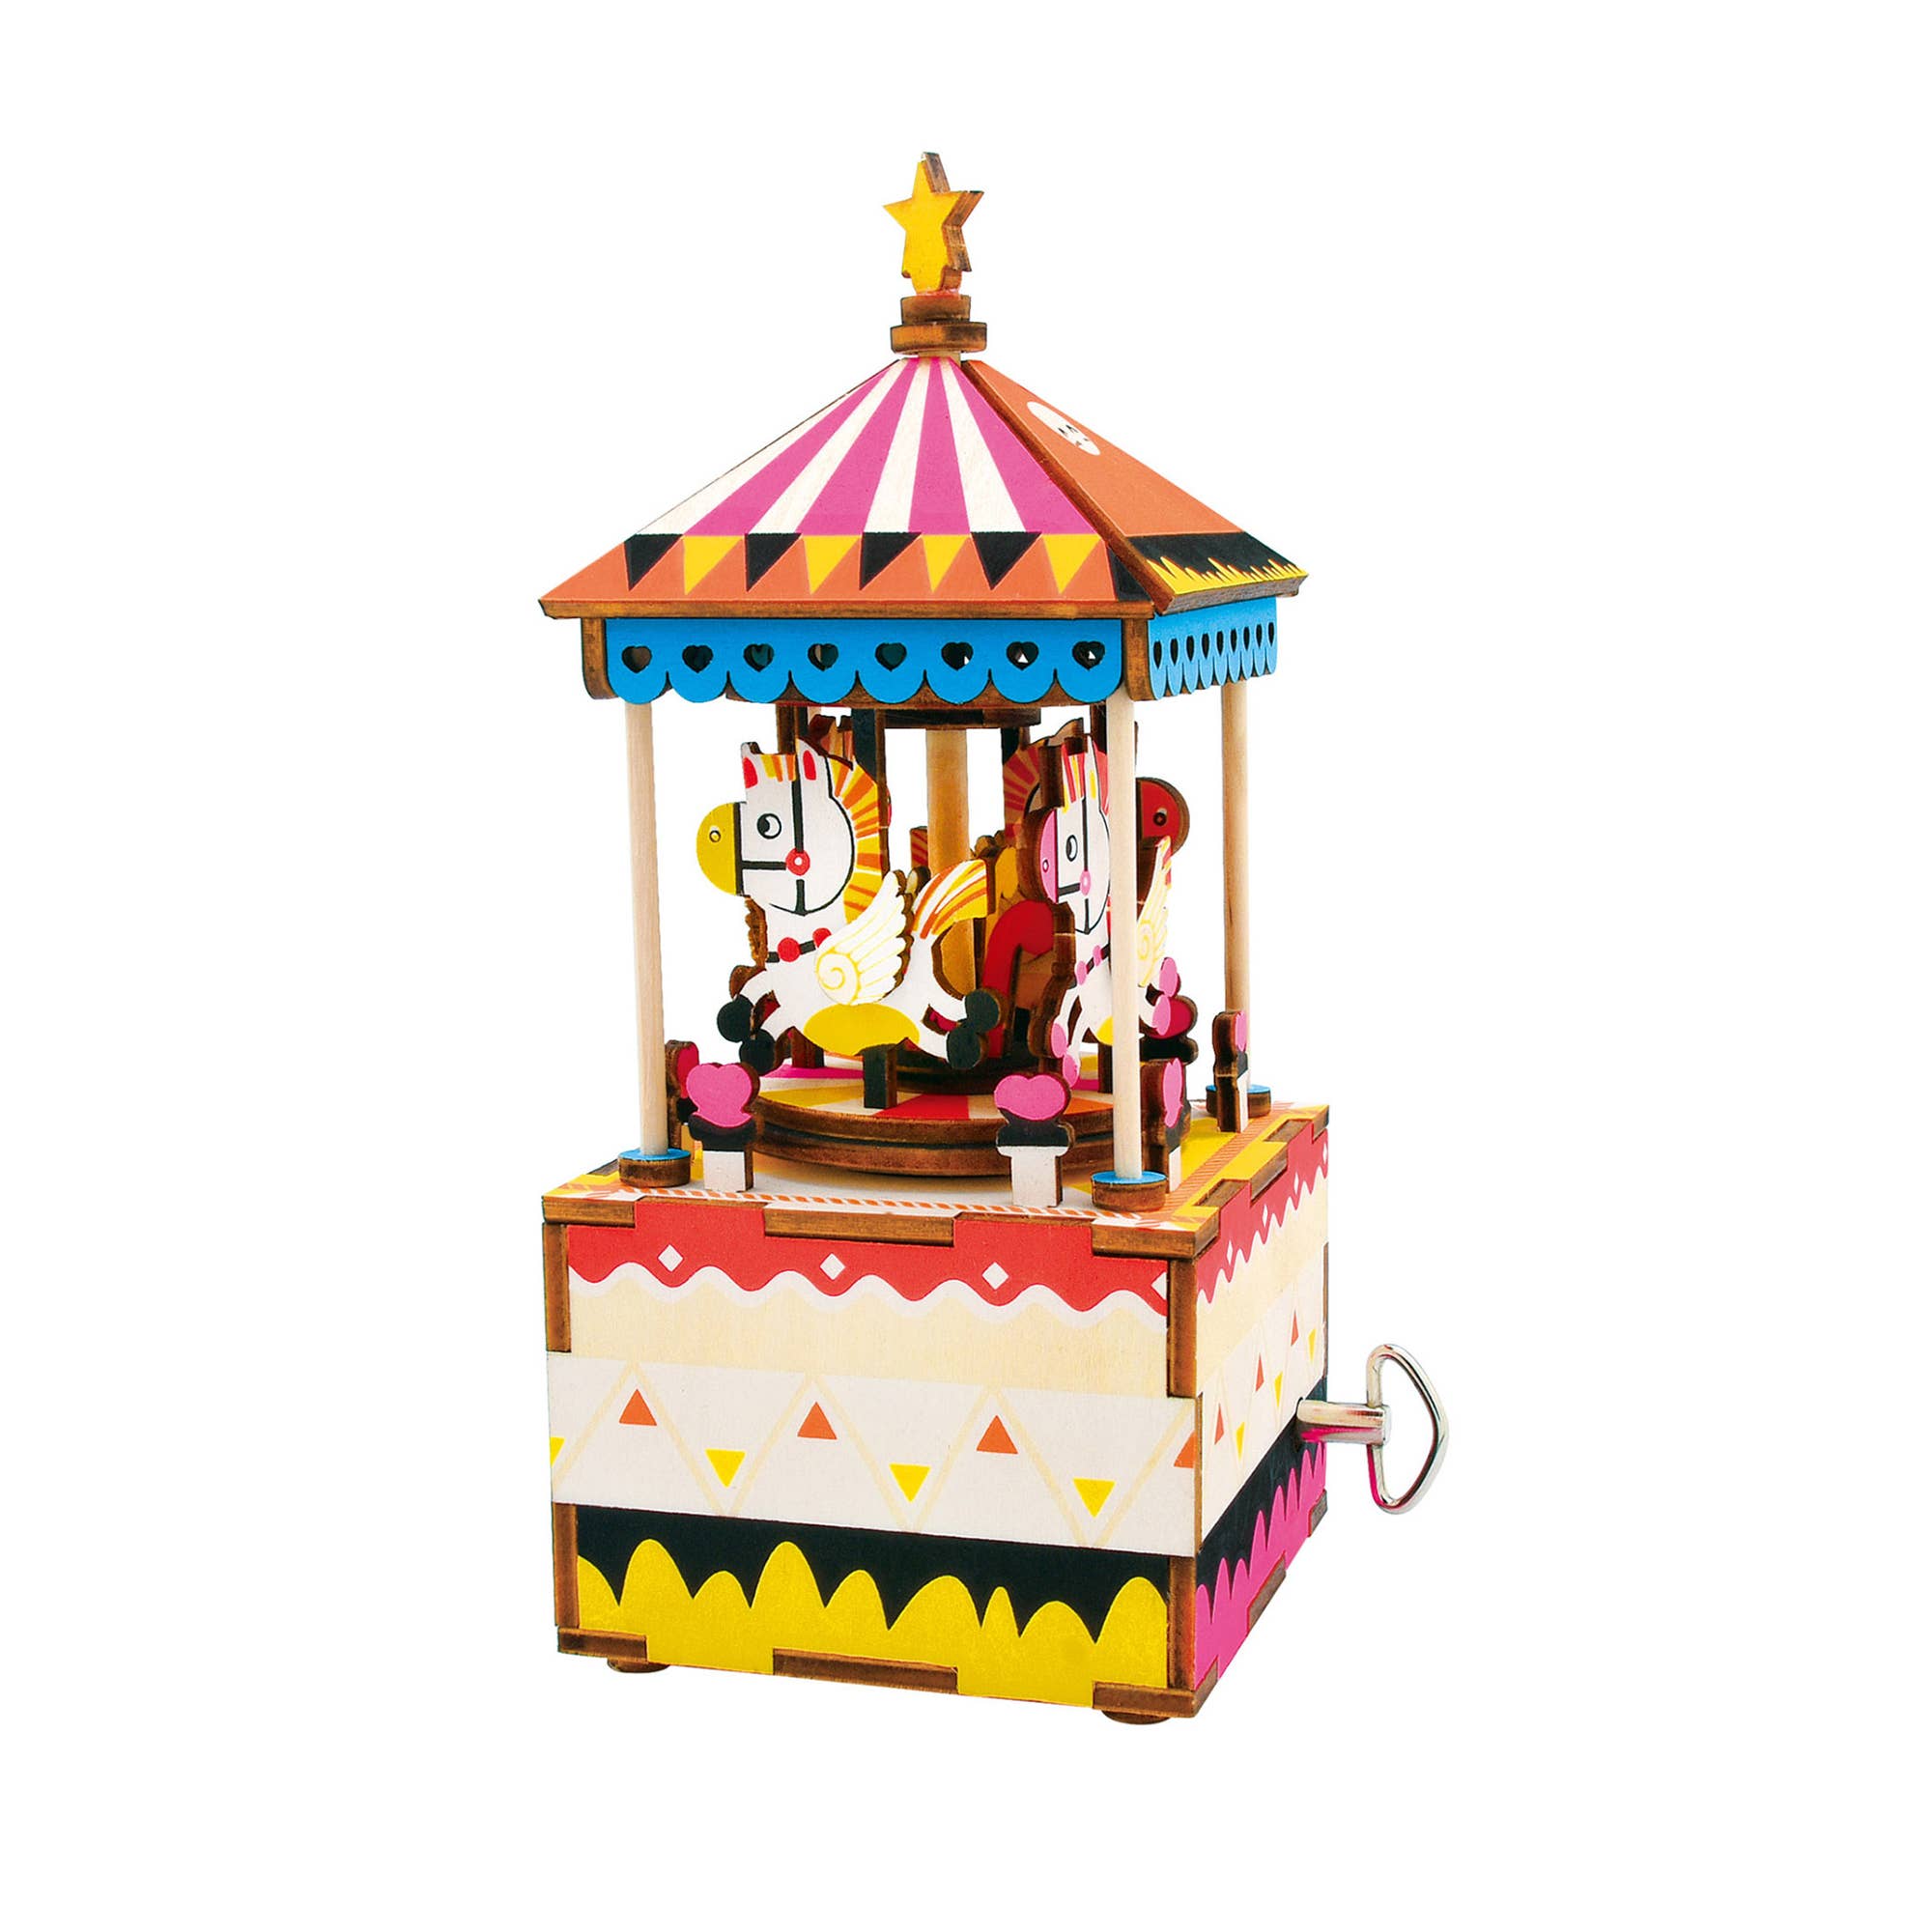 Pink Poppy Pirate Ship Childs Musical Carousel